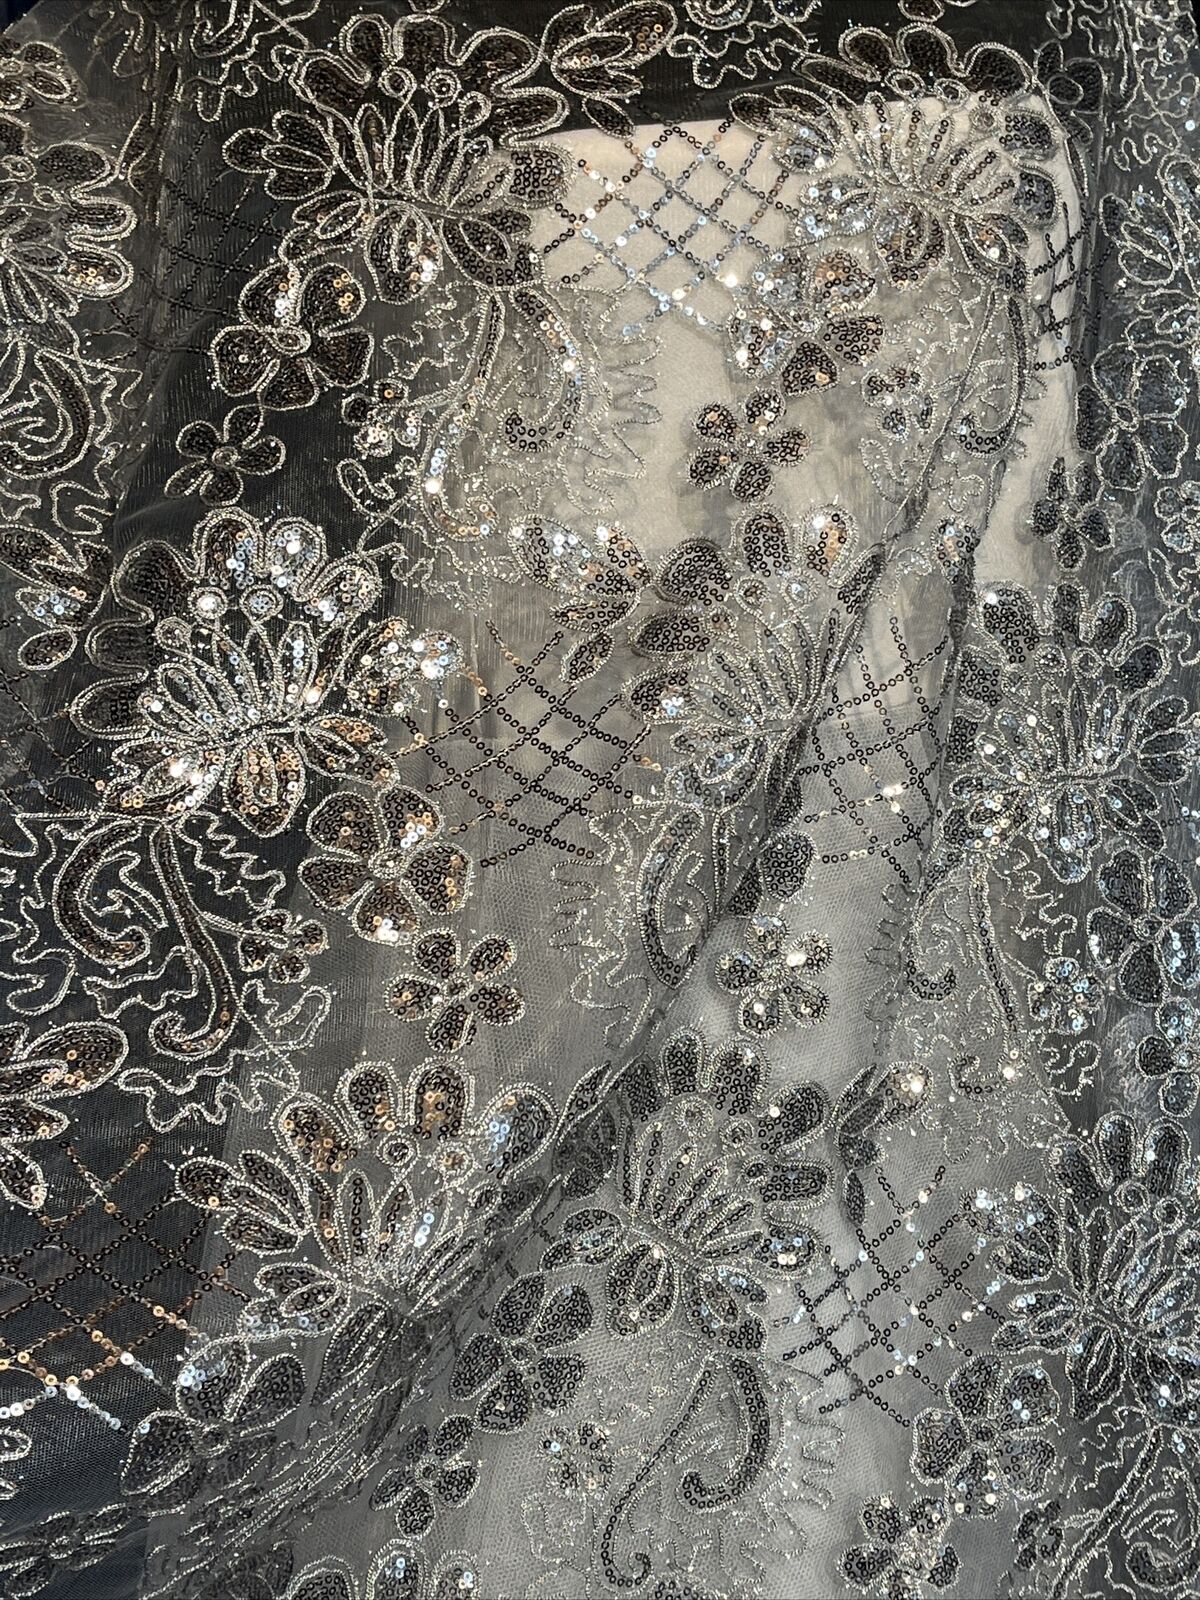 Silver Wedding Sparkly Embroidered Lace with Sequins